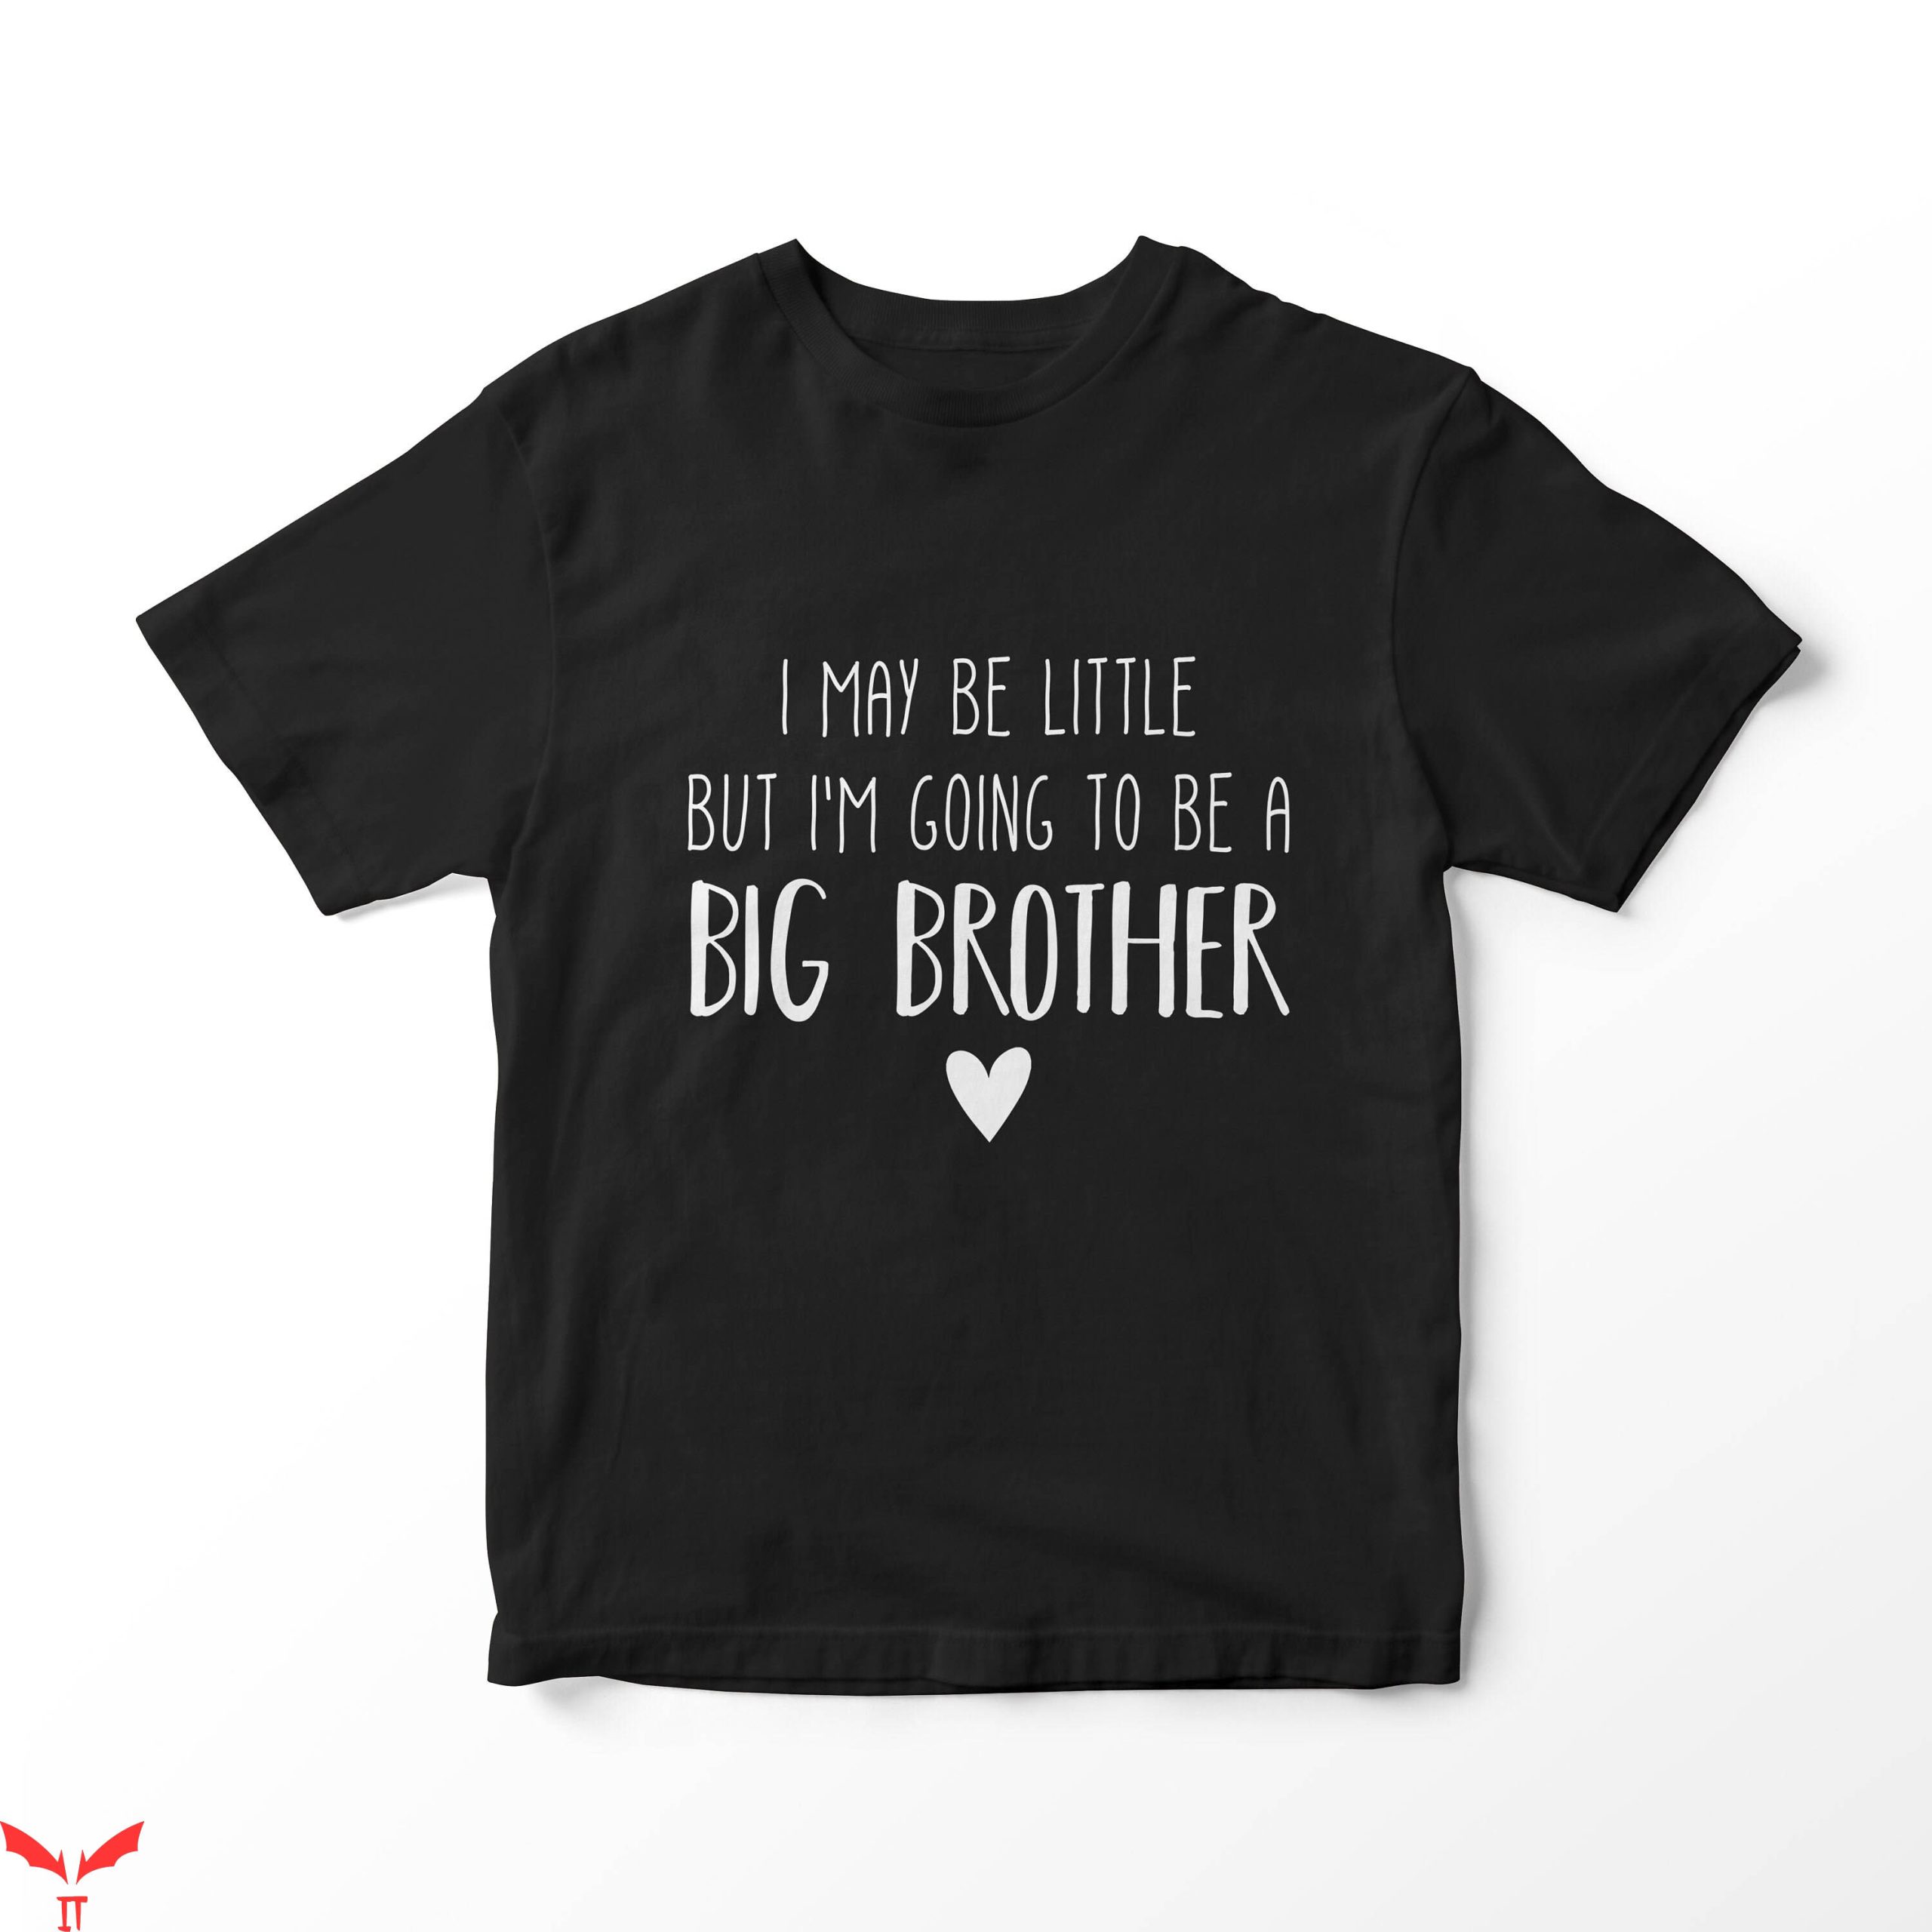 Big Brother Pregnancy Announcement T-Shirt Baby Announcement